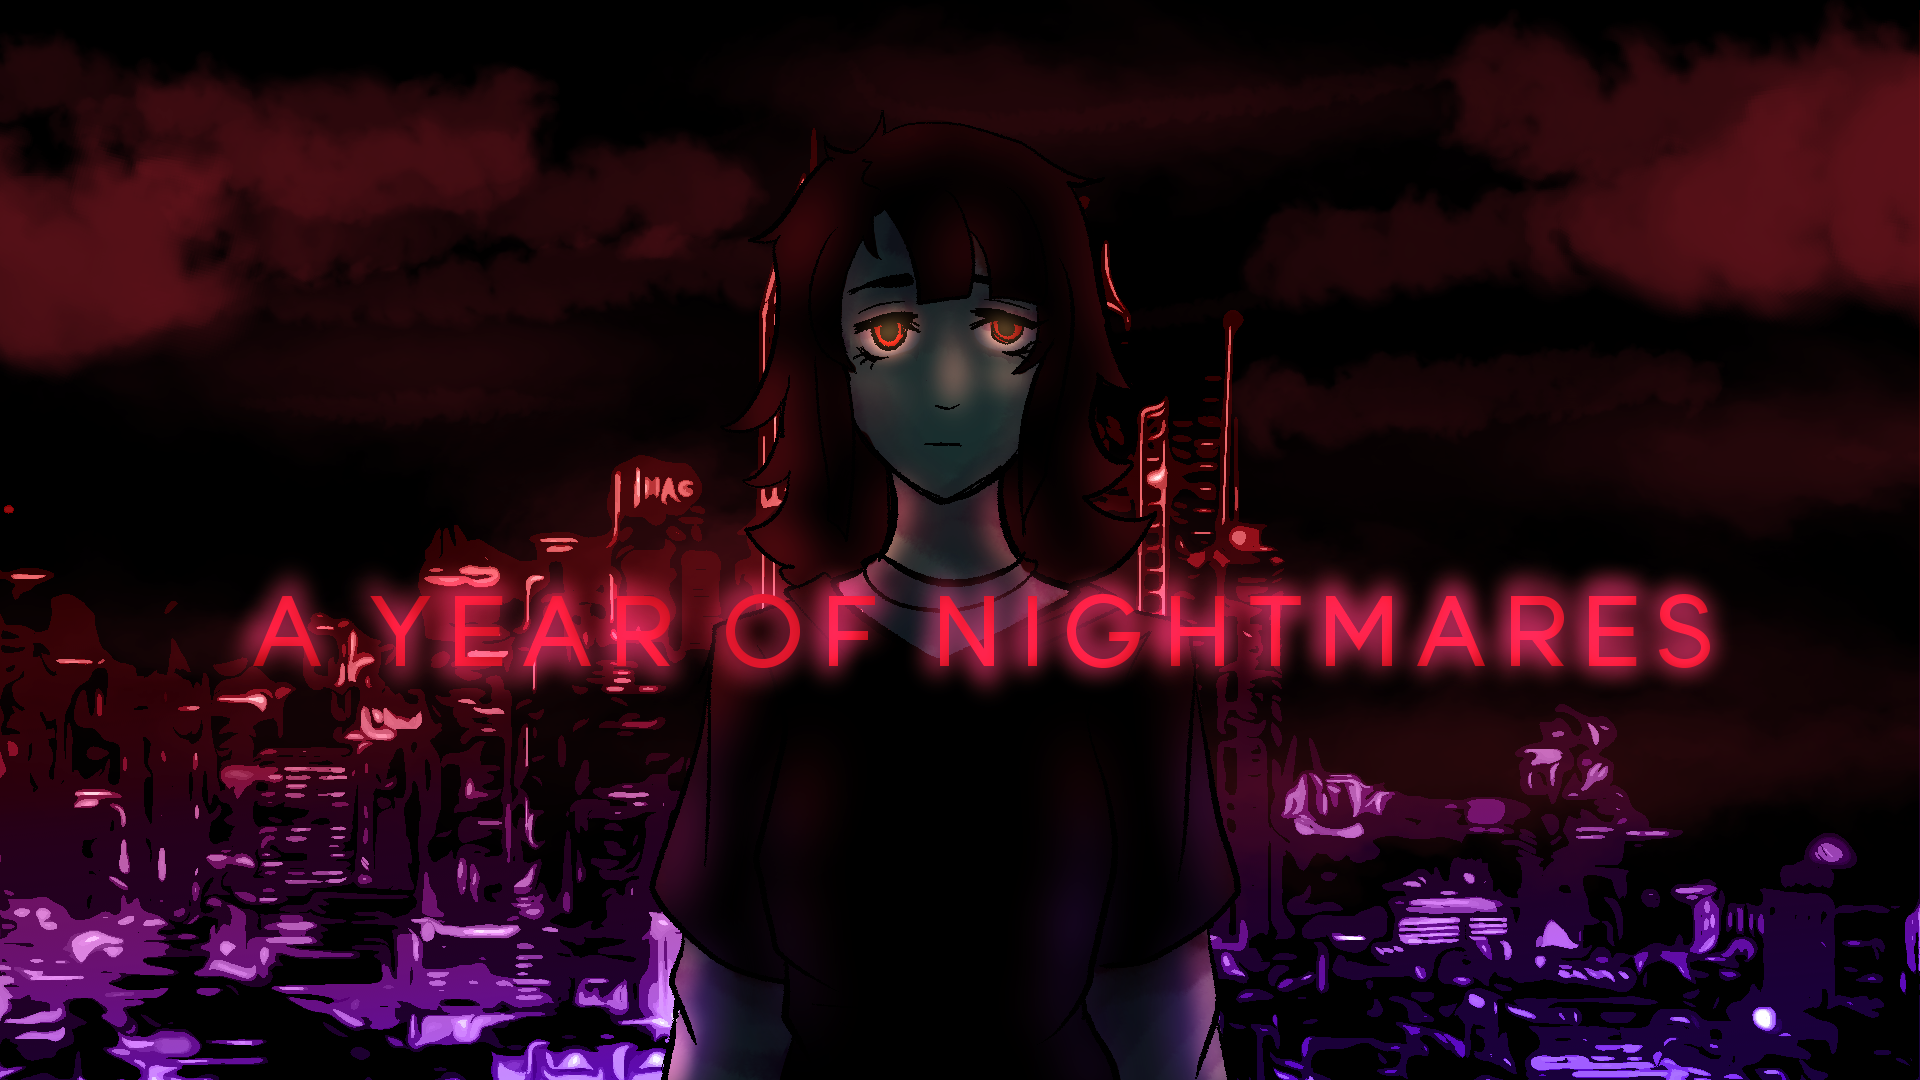 A Year of Nightmares